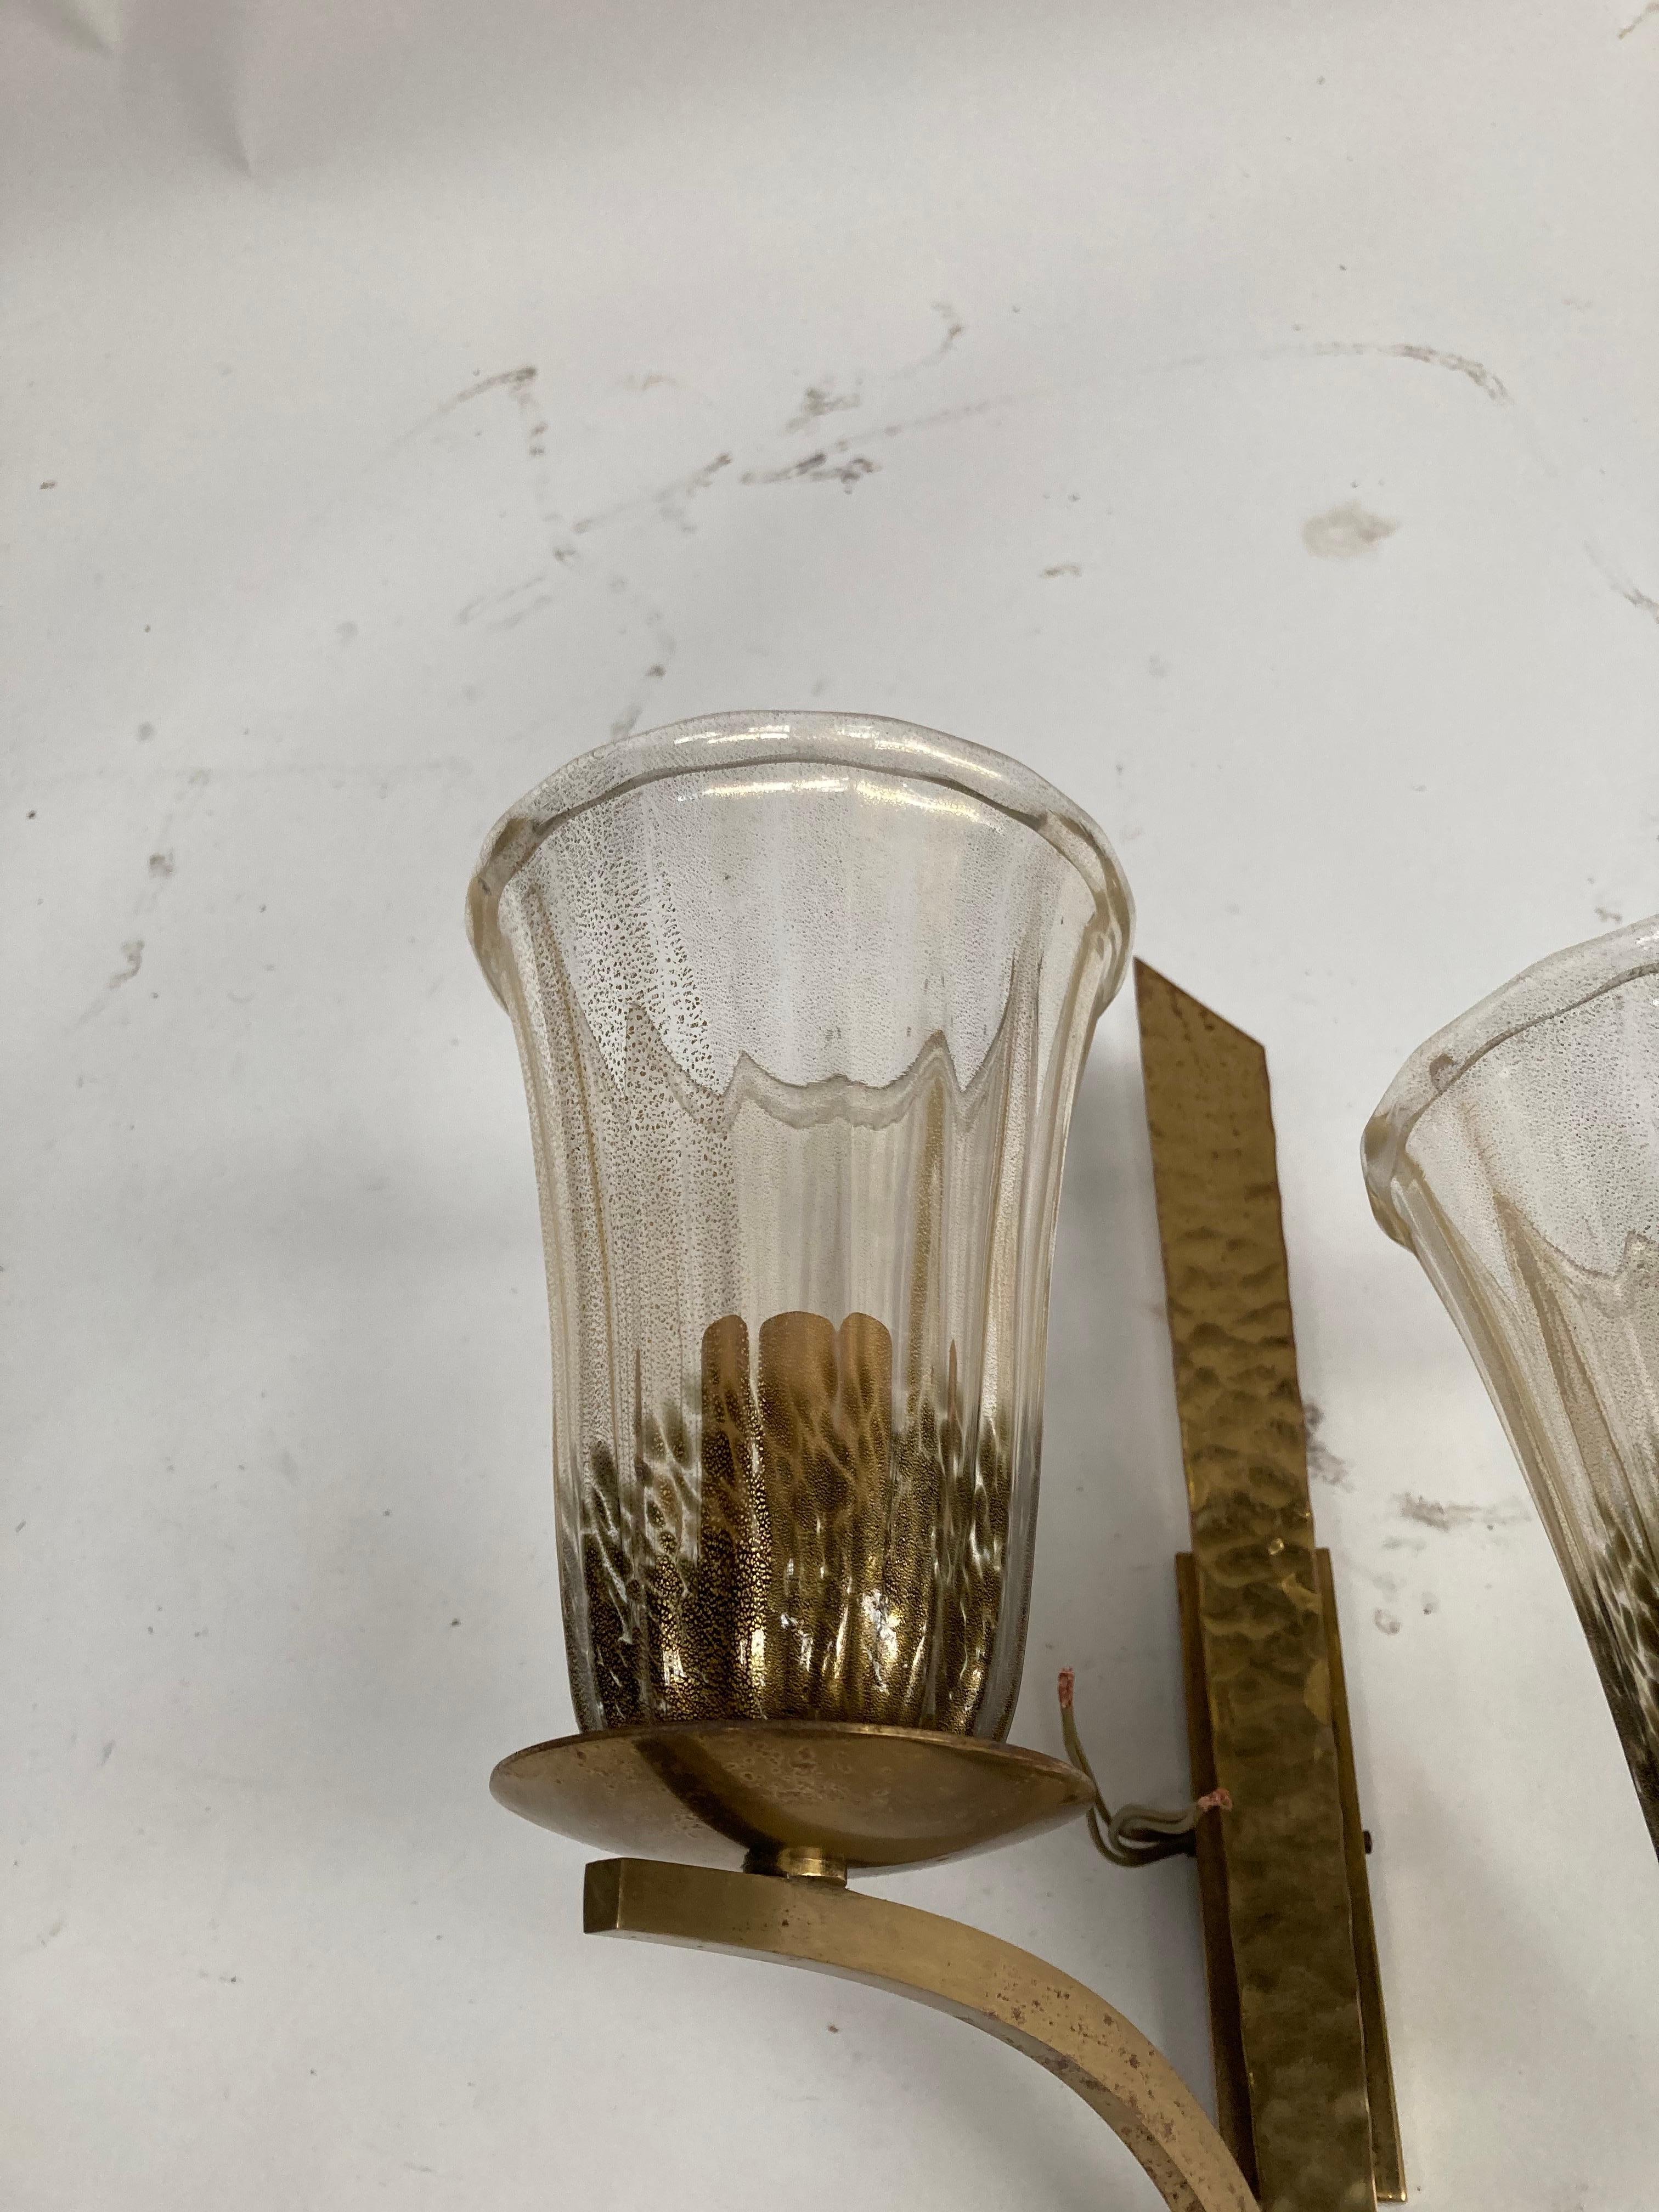 Very interesting pair of brass sconces with Murano glass
Circa 1960's.